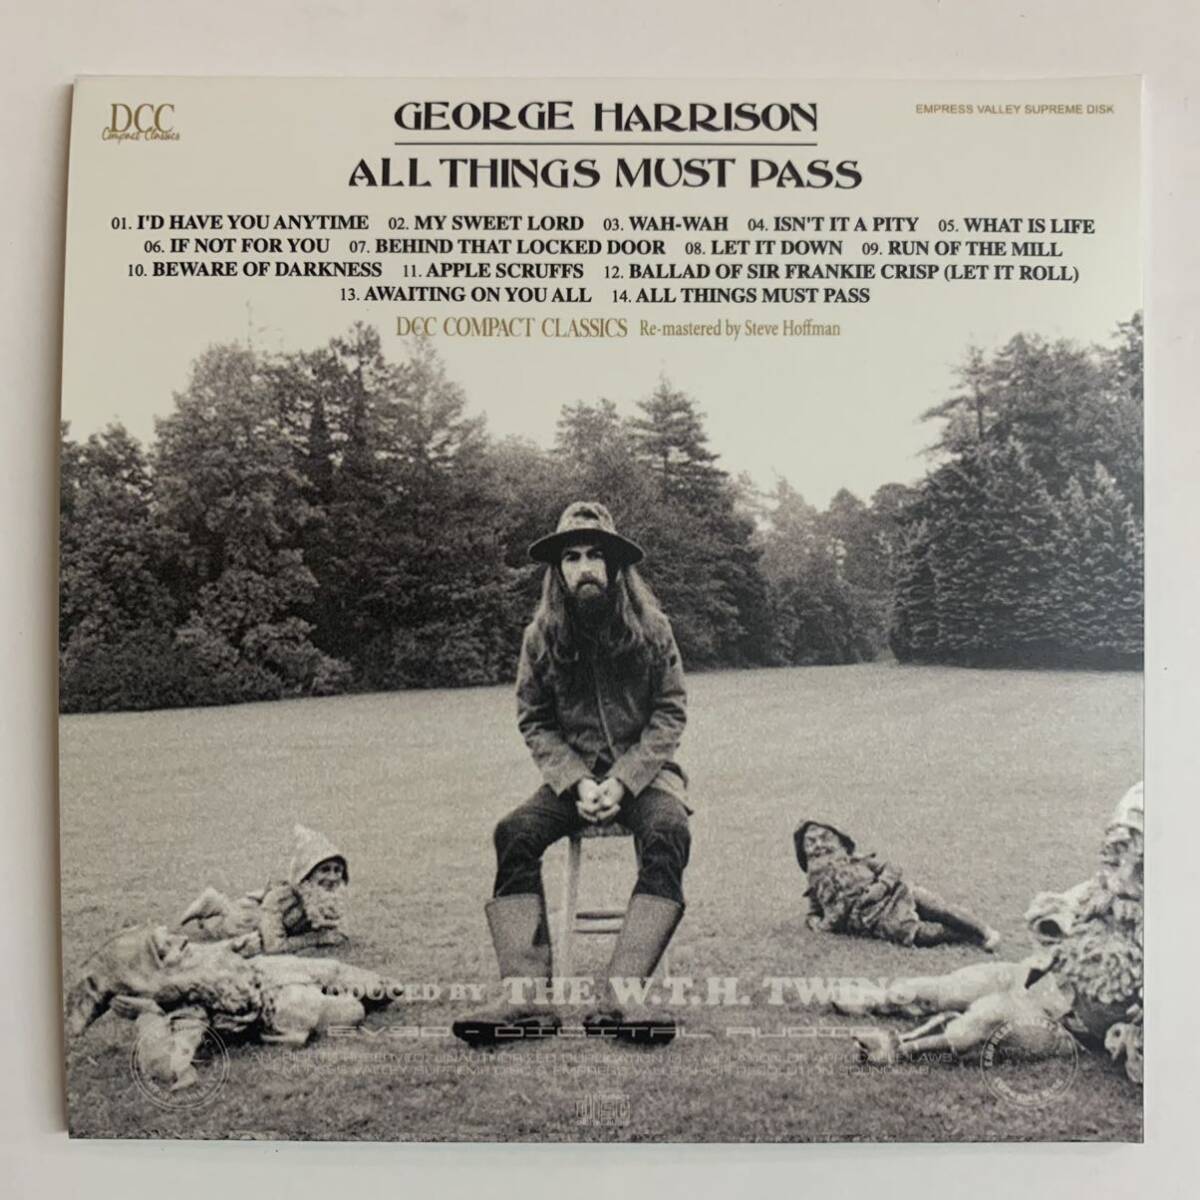 GEORGE HARRISON / ALL THINGS MUST PASS DCC COMPACT CLASSICS Remastered by Steve Hoffman (CD) 「帯付き紙ジャケット仕様限定盤」の画像5